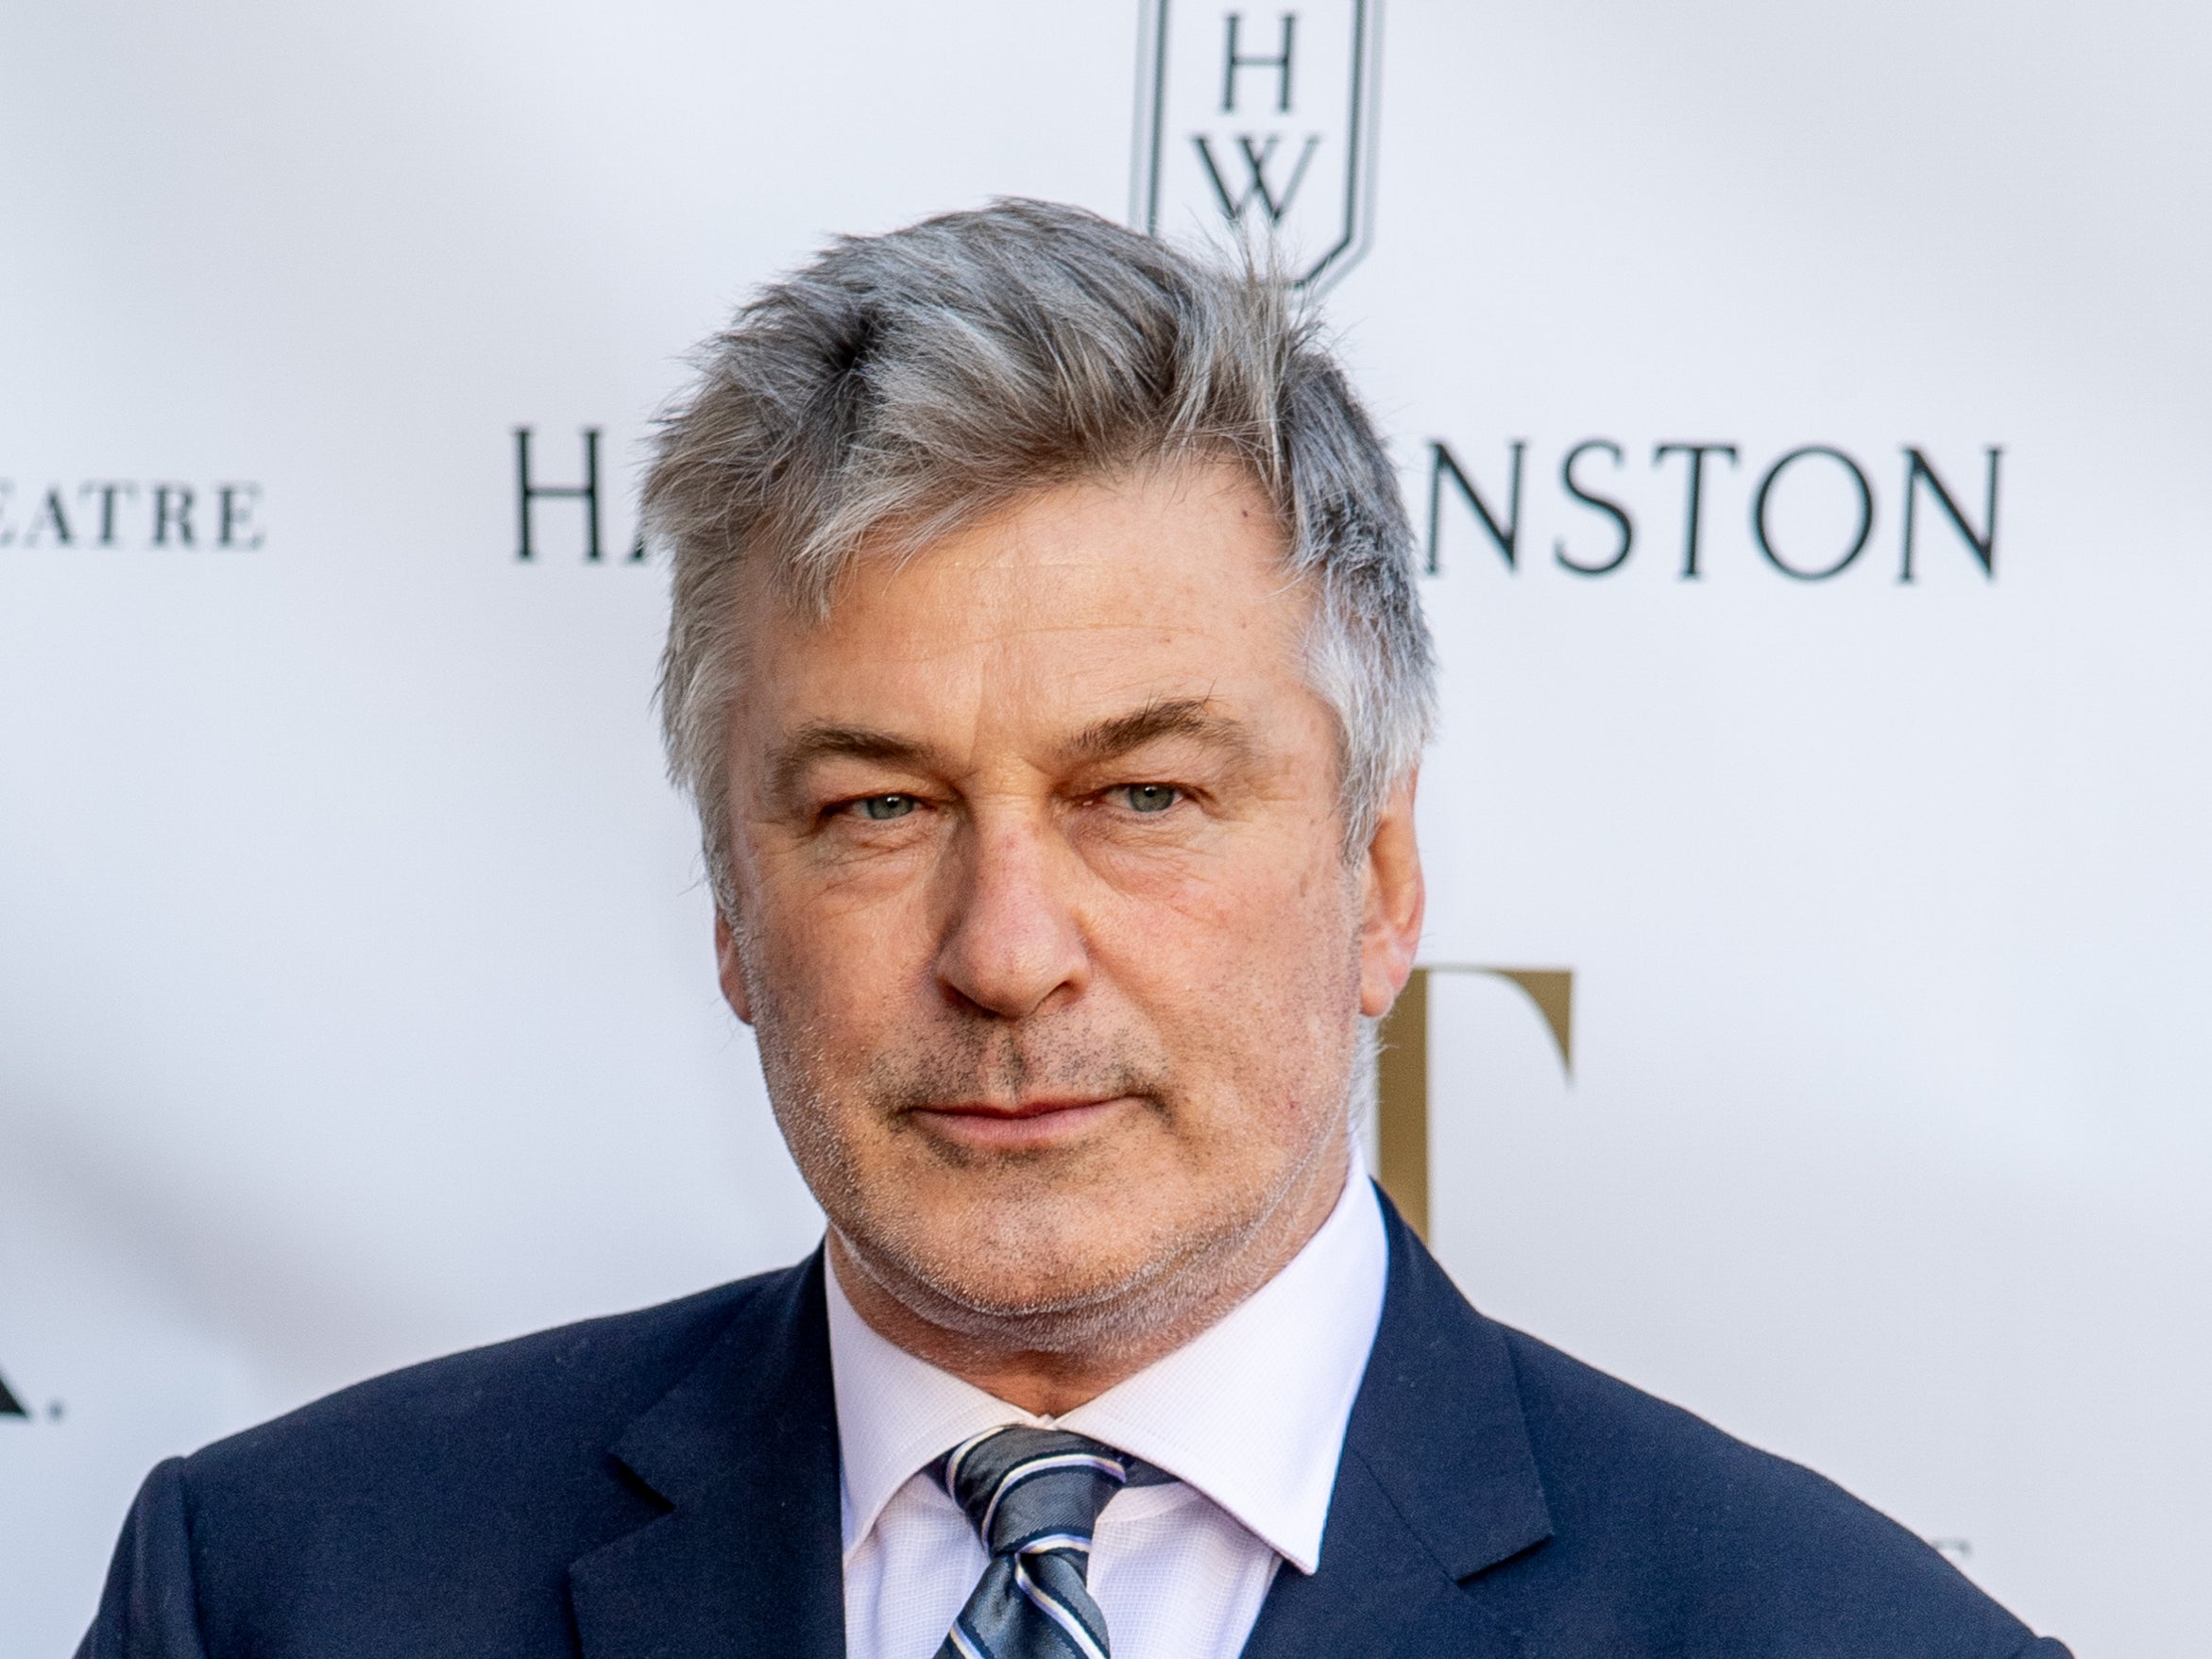 Alec Baldwin has reportedly talked at length about the shooting in a sit-down interview